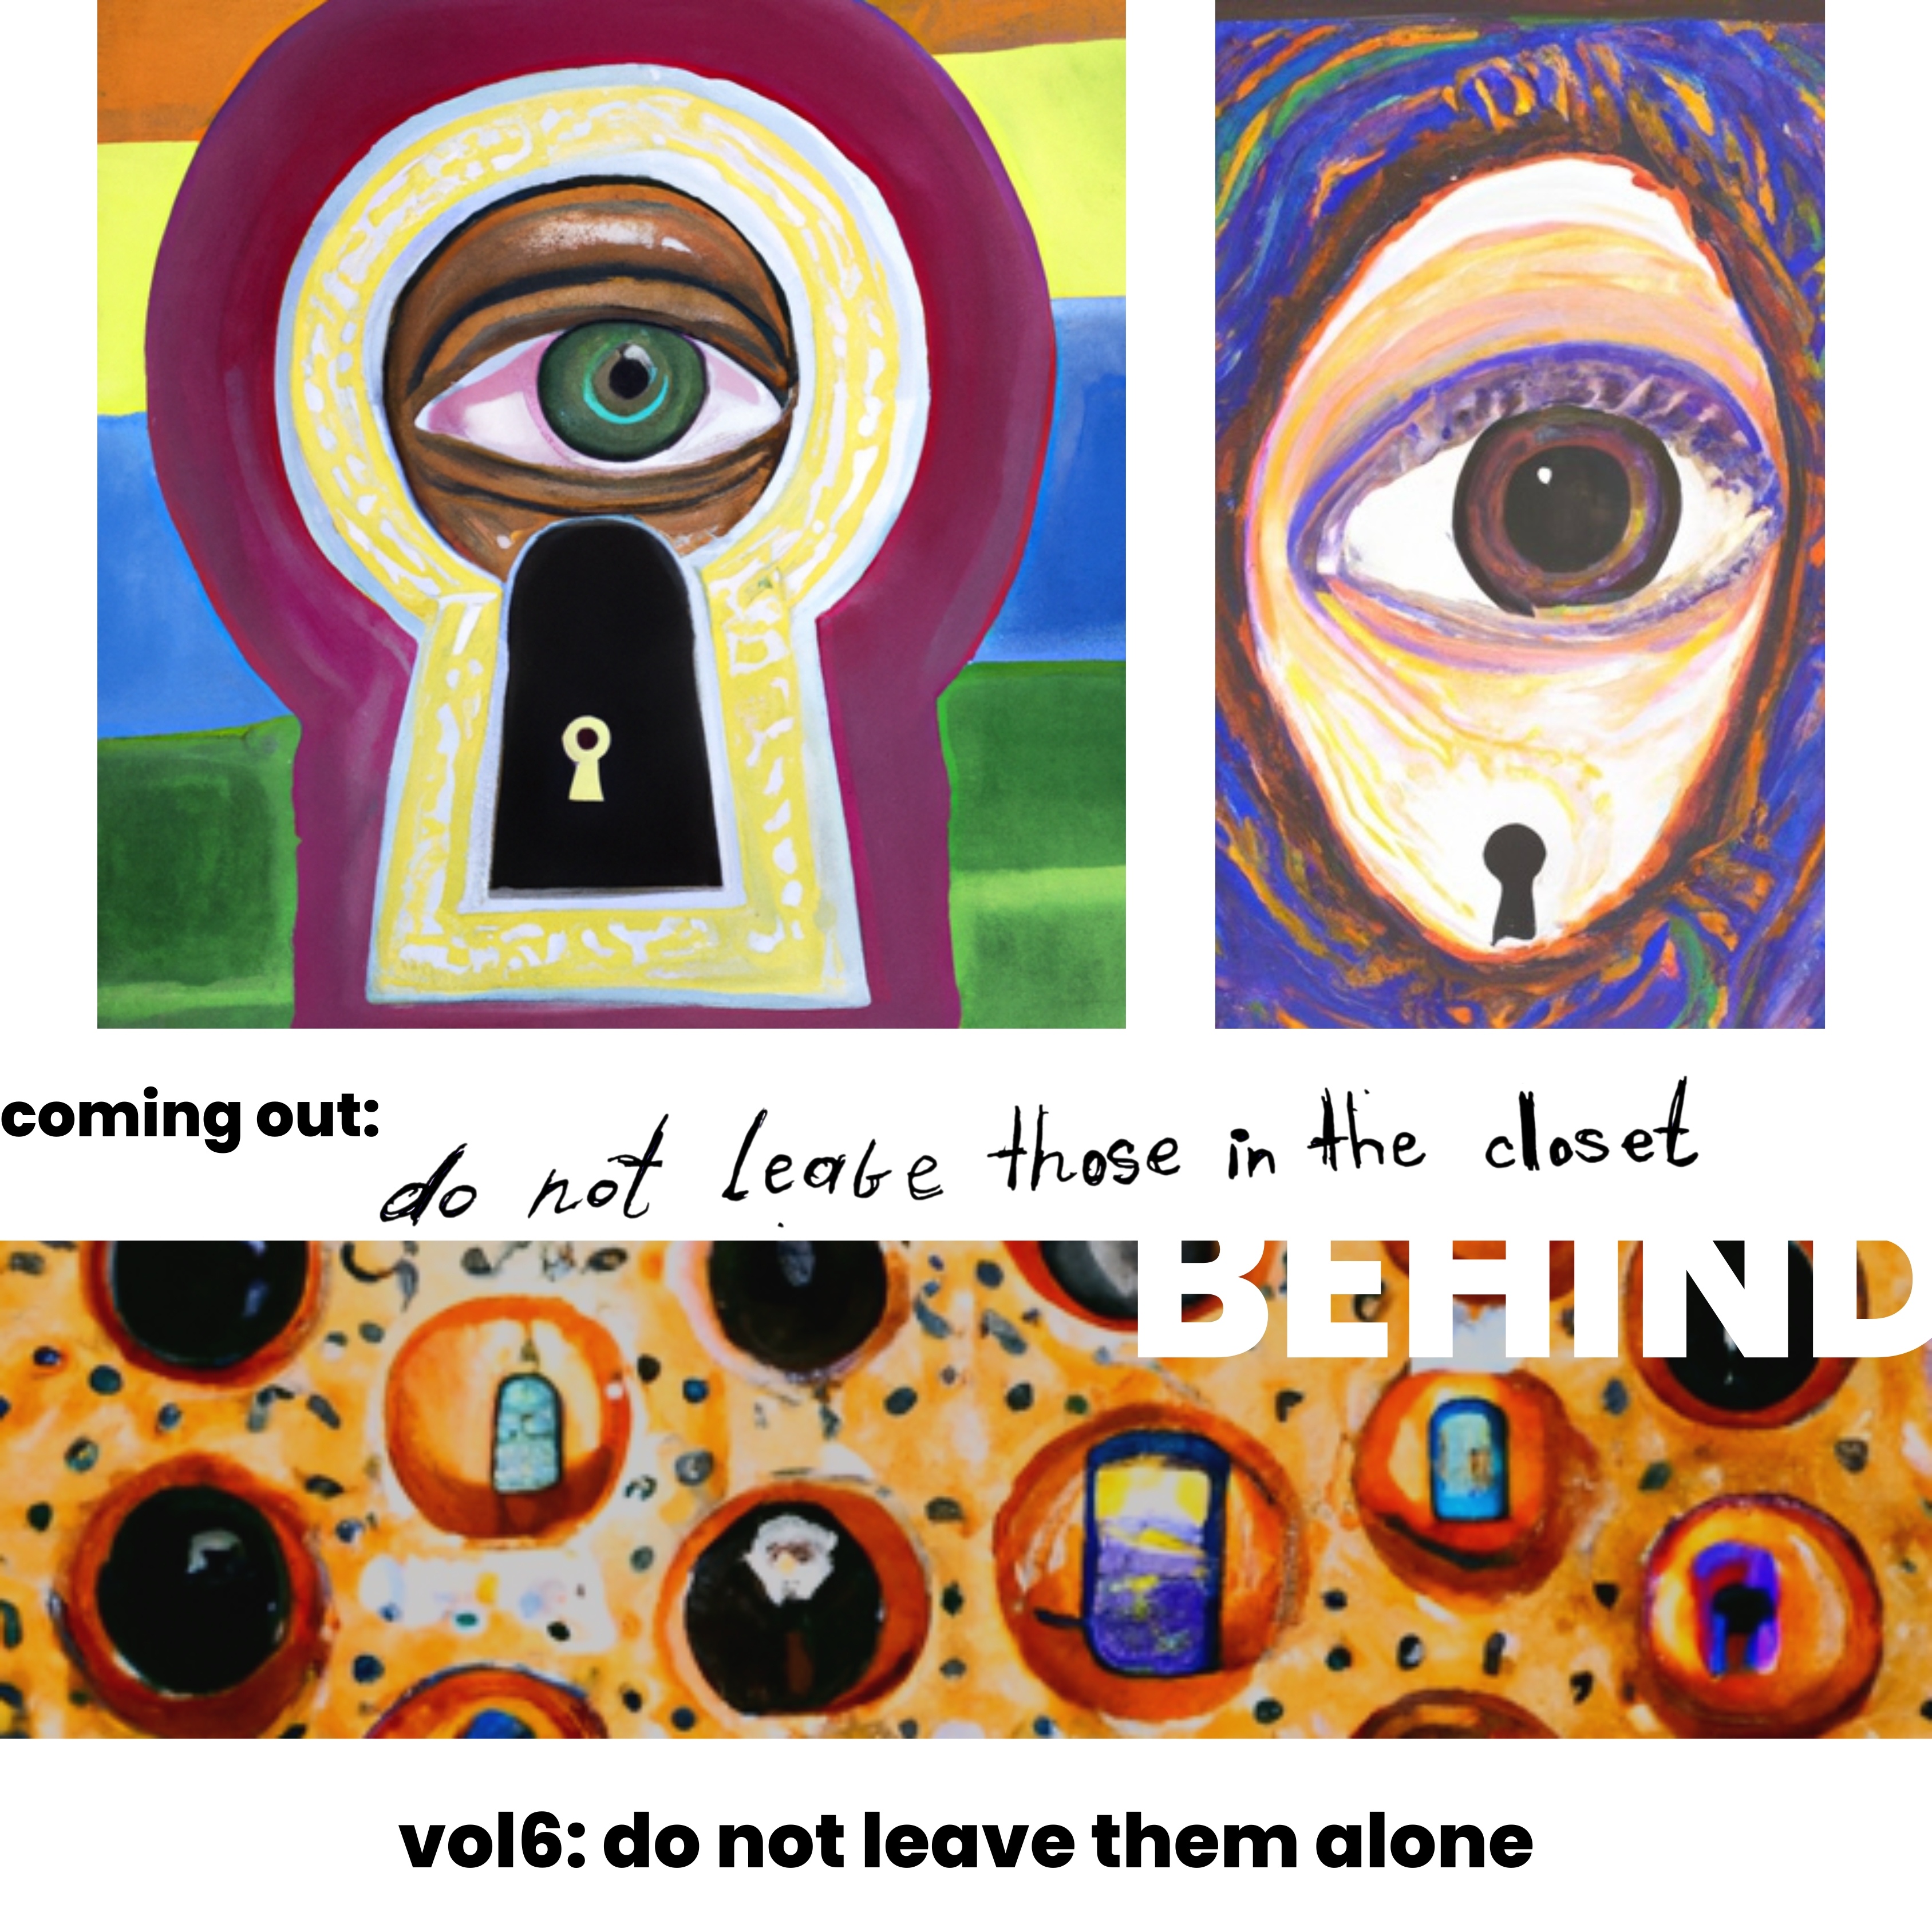 "Leave No One Behind" Group Exhibition

Vol6: coming out: do not leave those in the closet behind, do not leave them alone.